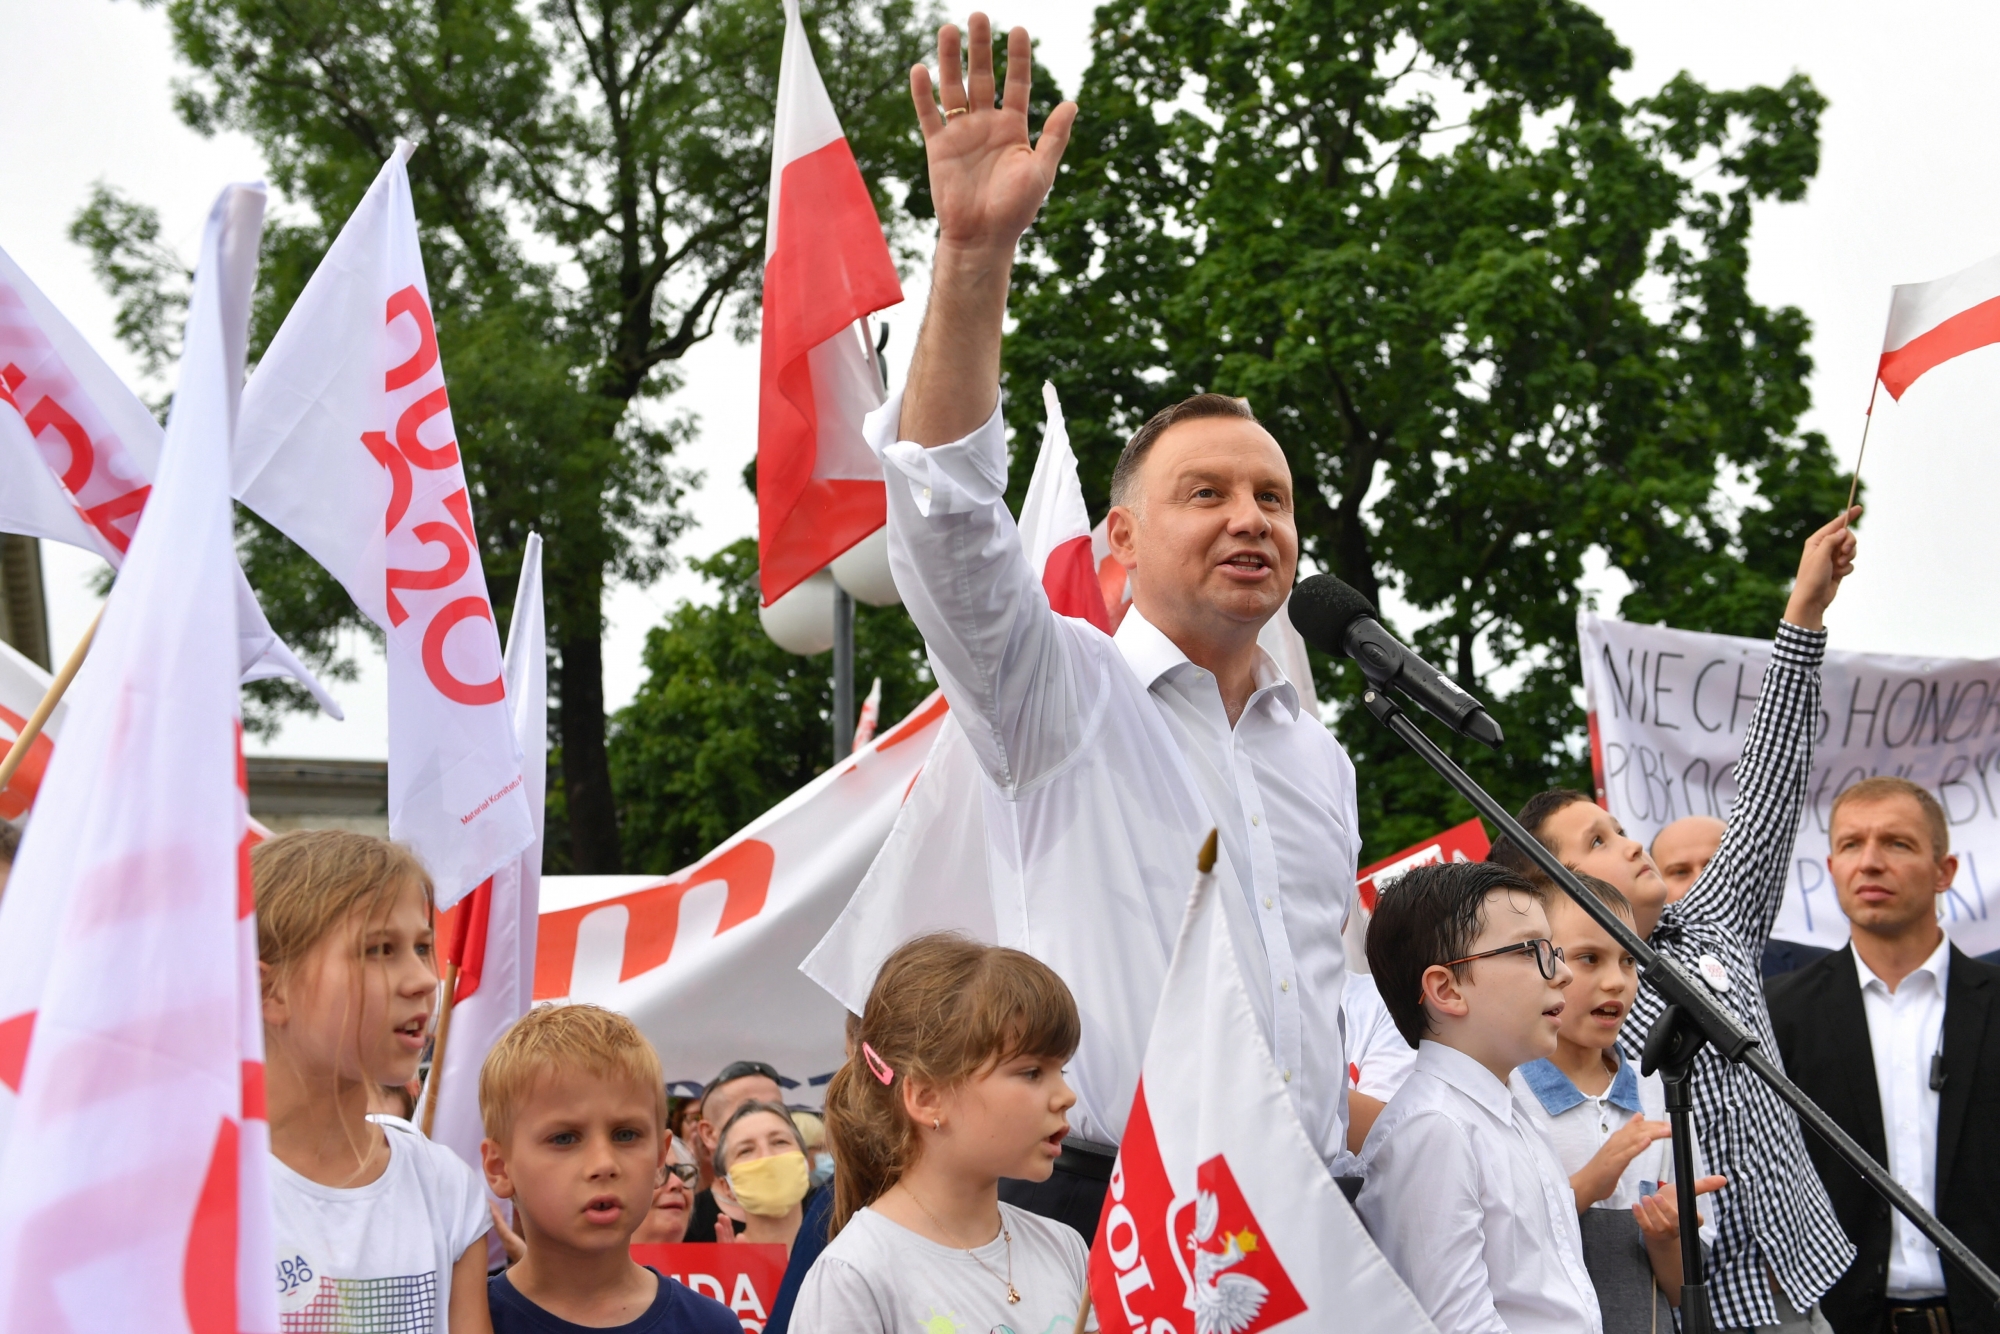 epa08508666 President Andrzej Duda (C) during a meeting with residents in Radom, Poland, 25 June 2020. Poland will hold its presidential election on 28 June 2020. Poles will be able to vote in polling stations with adherence to a strict sanitary regime, or by postal vote.  EPA/WOJTEK JARGILO POLAND OUT
ArcInfo